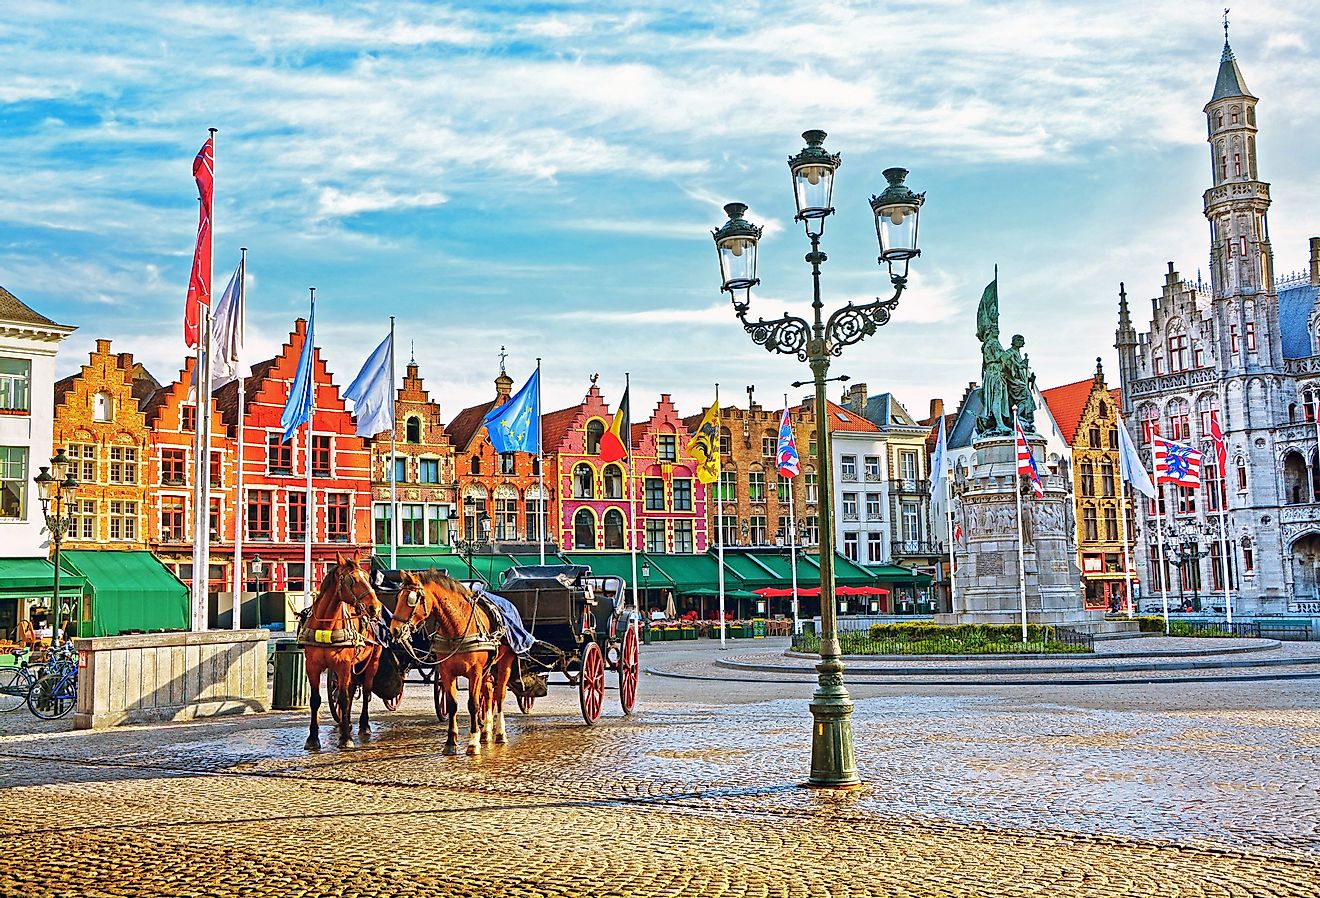 Horse carriages on Grote Markt square in medieval city Brugge, Belgium.